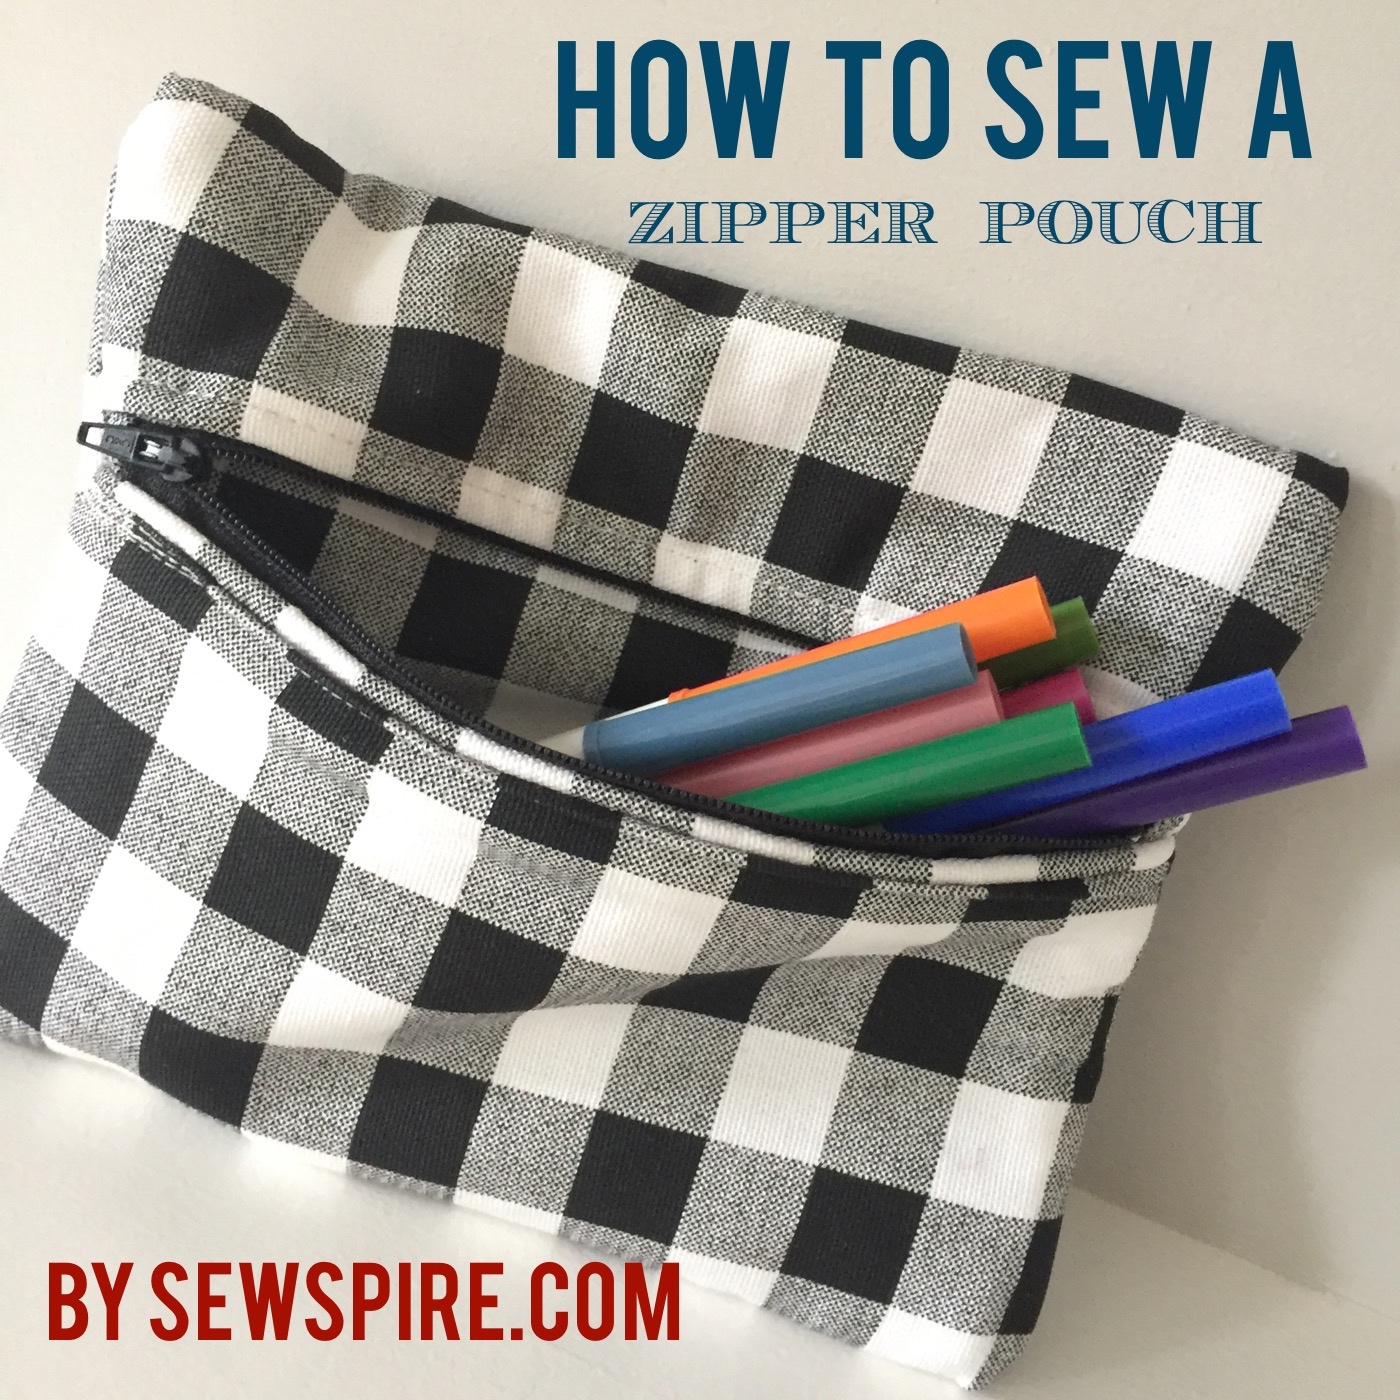 How to Sew A Zippered Pouch